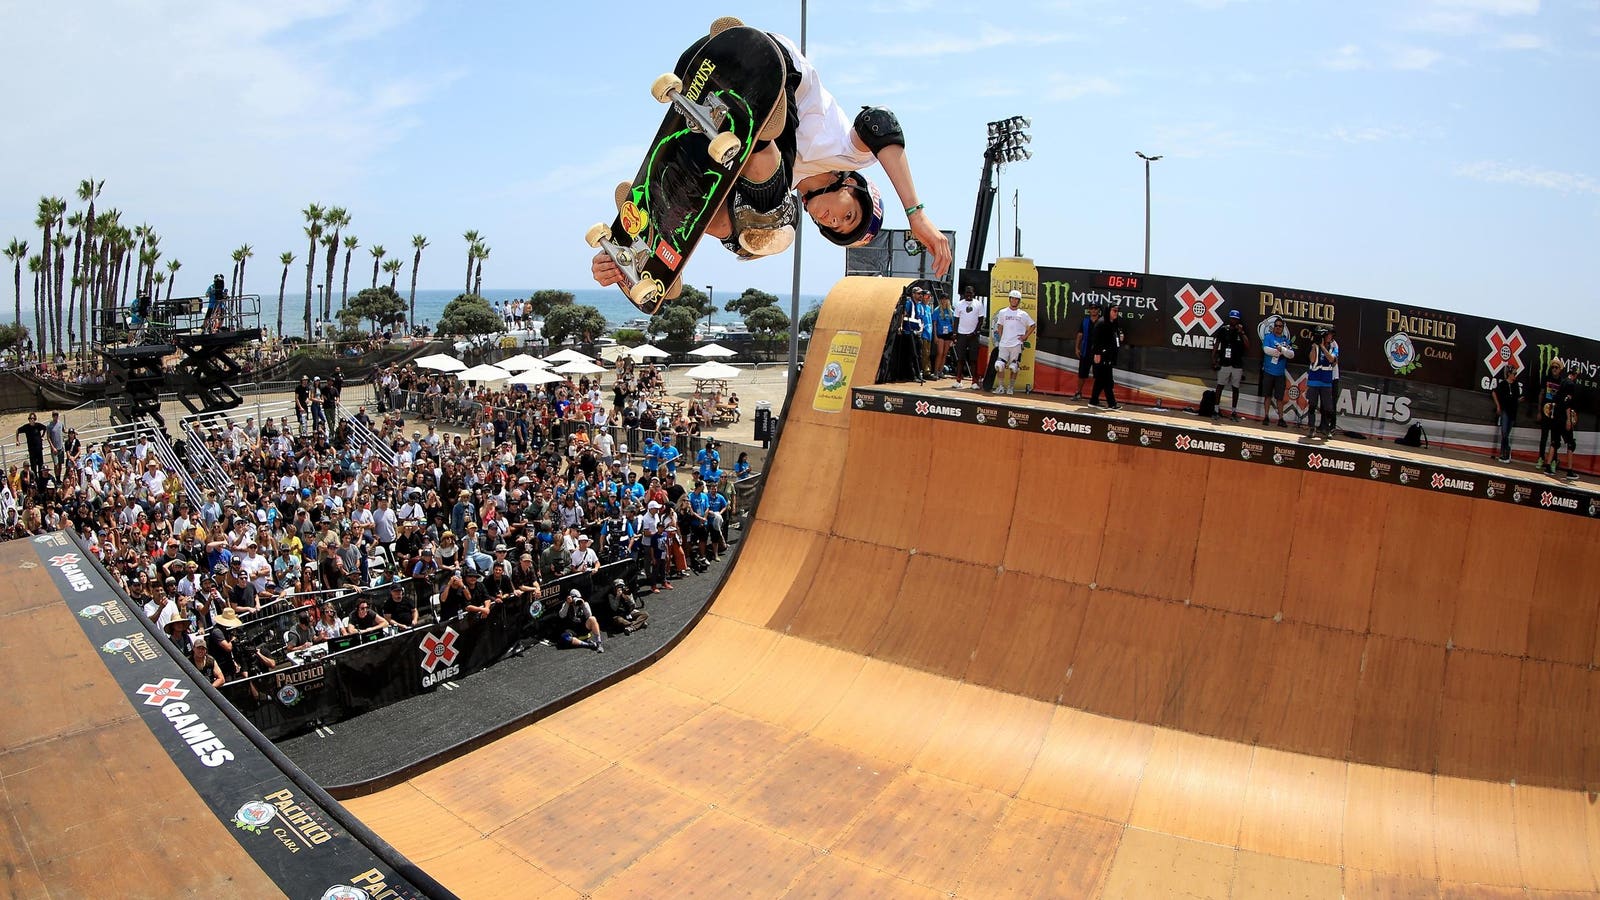 Why The Time Is Right For So Many New Action Sports Leagues, Events